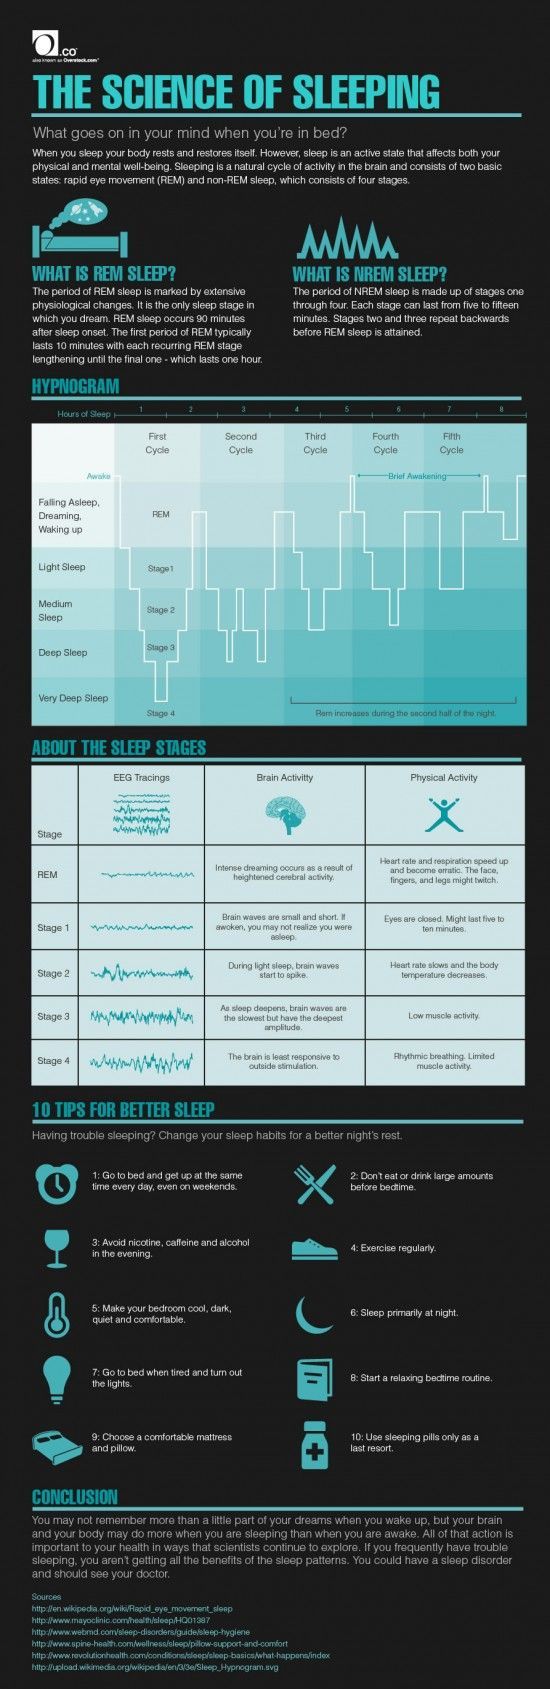 THE SCIENCE OF SLEEPING. A